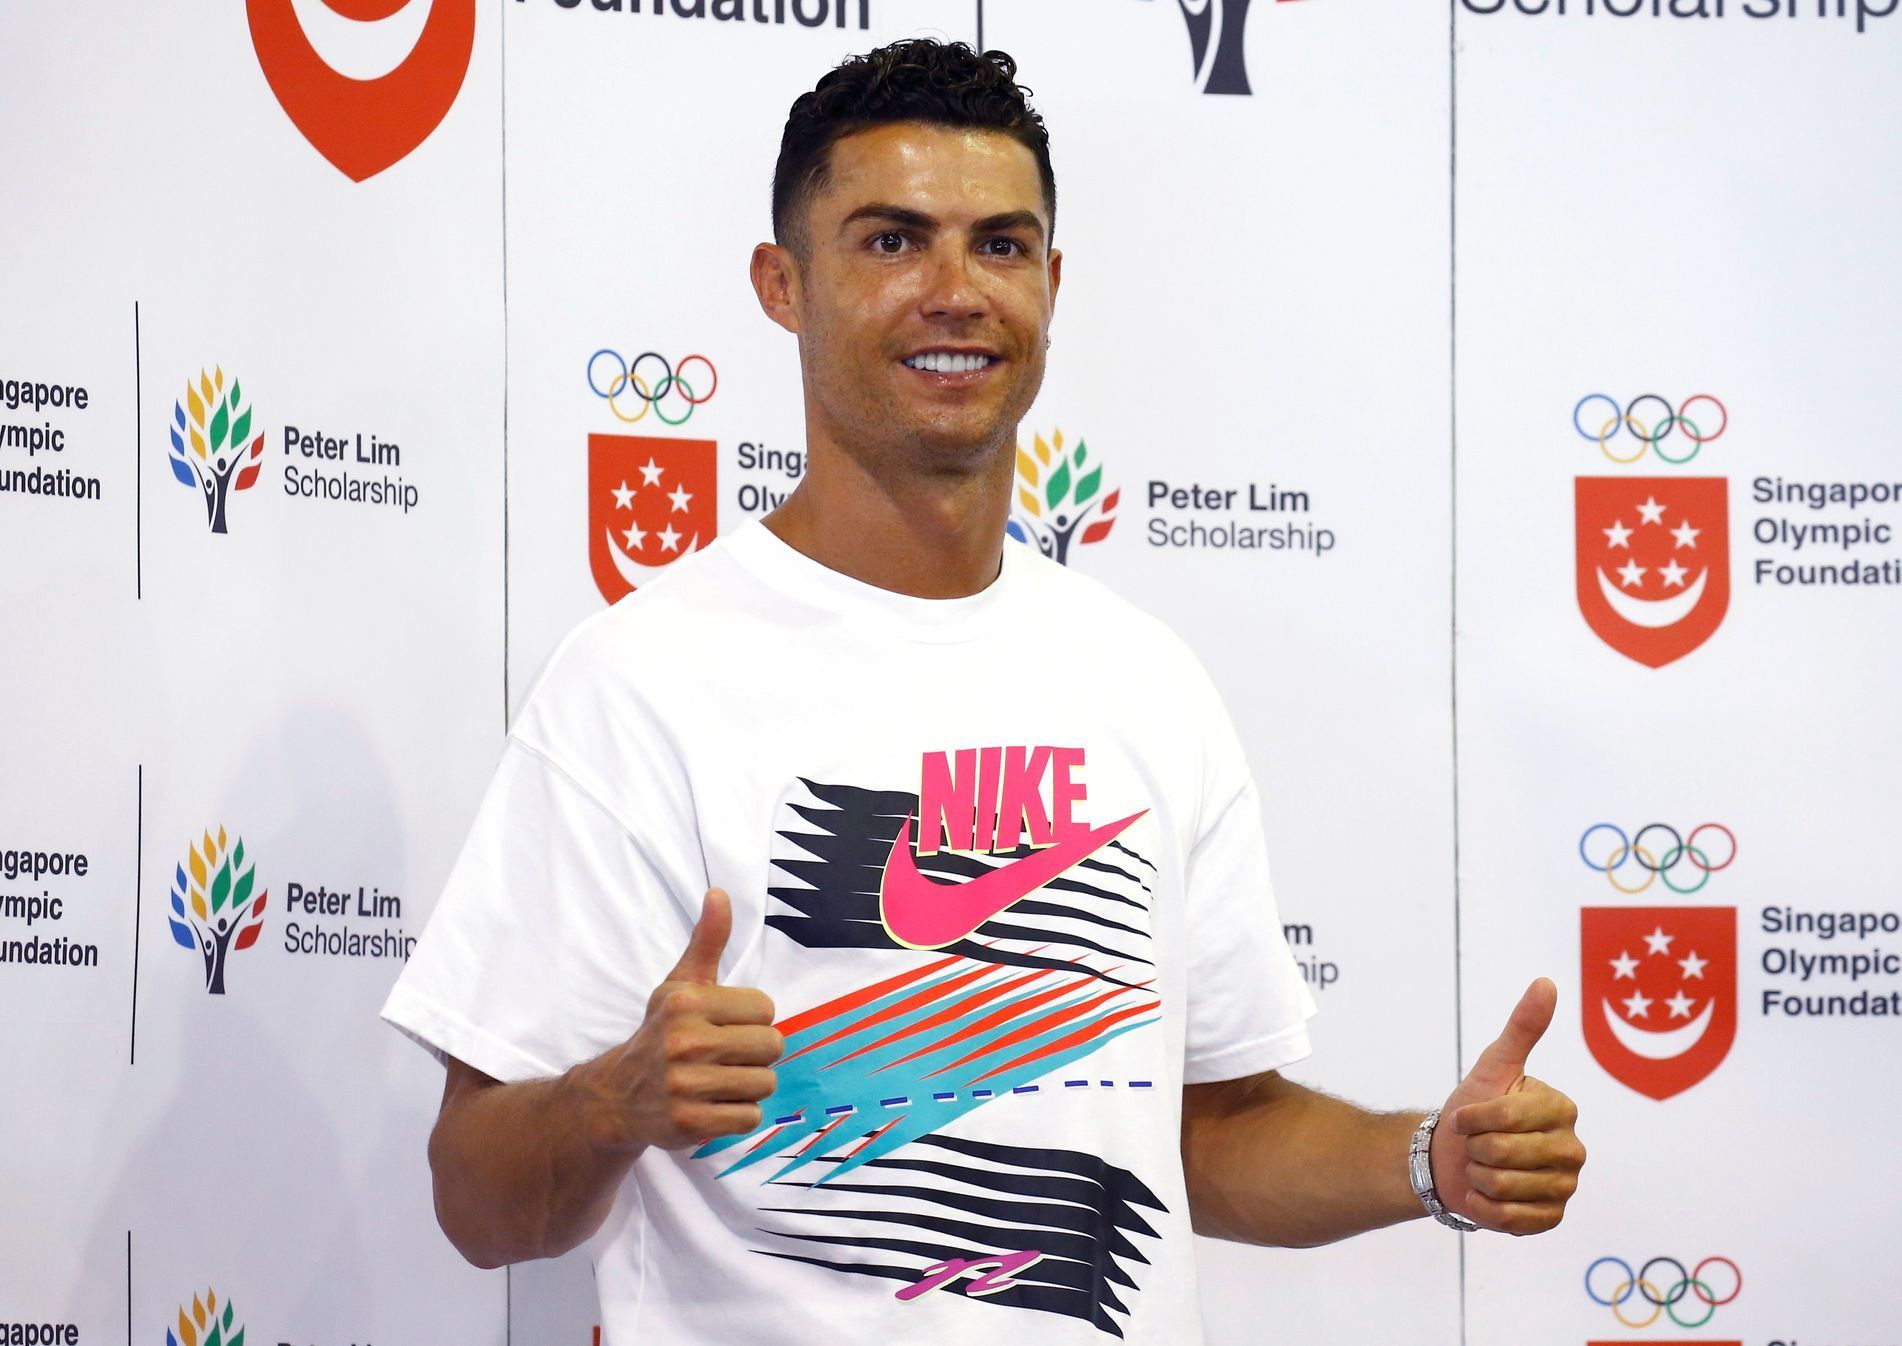 Portuguese soccer player Cristiano Ronaldo is seen during a visit to Yumin Primary School in Singapore